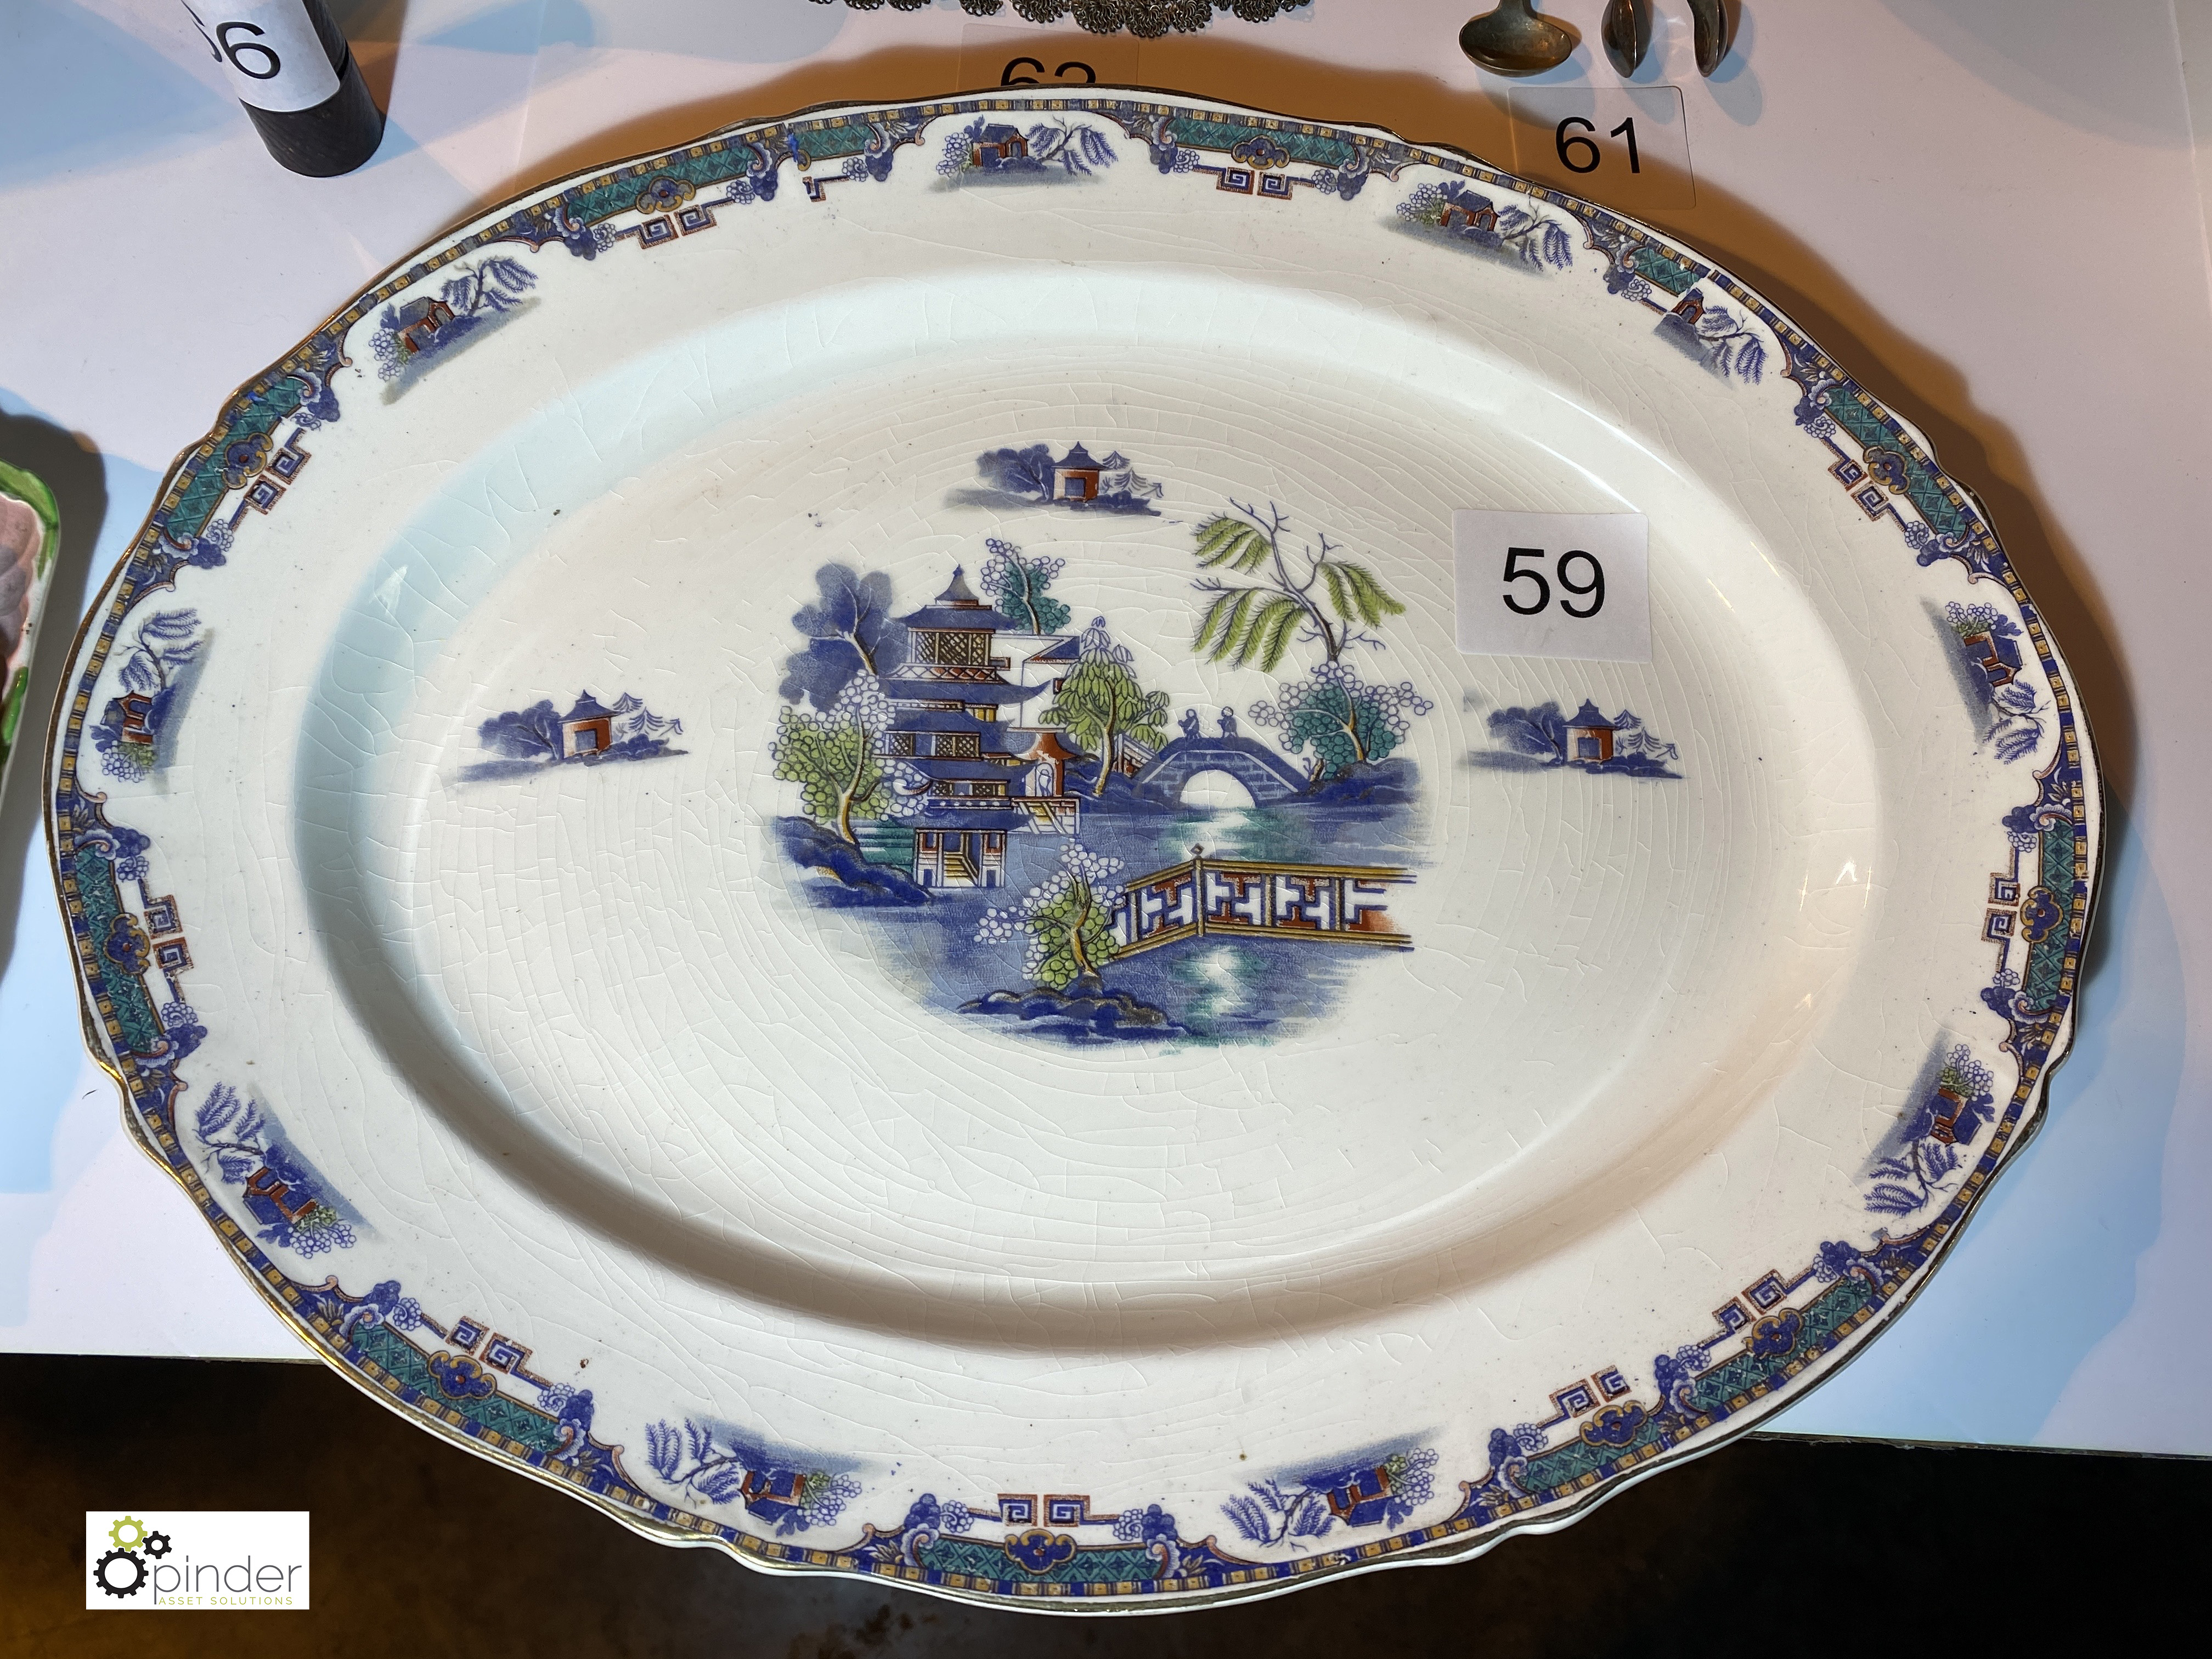 Oriental Meat Dish by Parrott & Co, Burslem (location: Wakefield / collection: Monday 7 March)